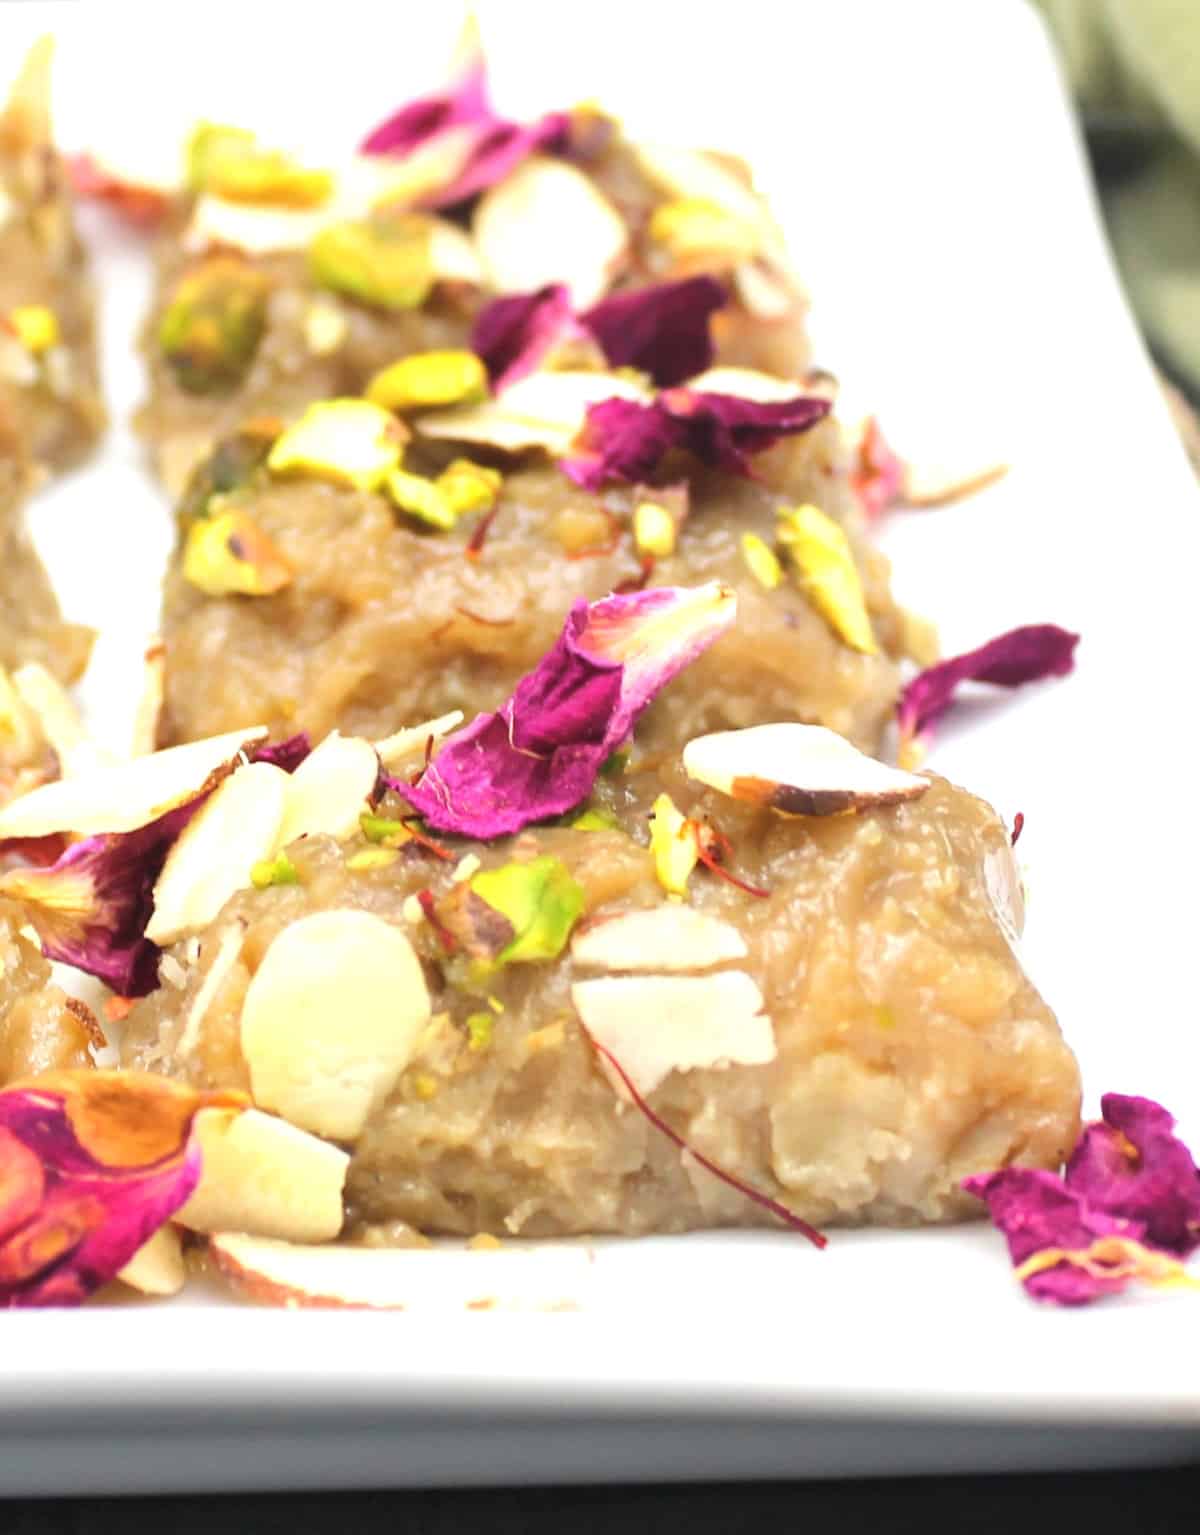 Vegan kalakand in white plate with rose petals, nuts and saffron garnish.